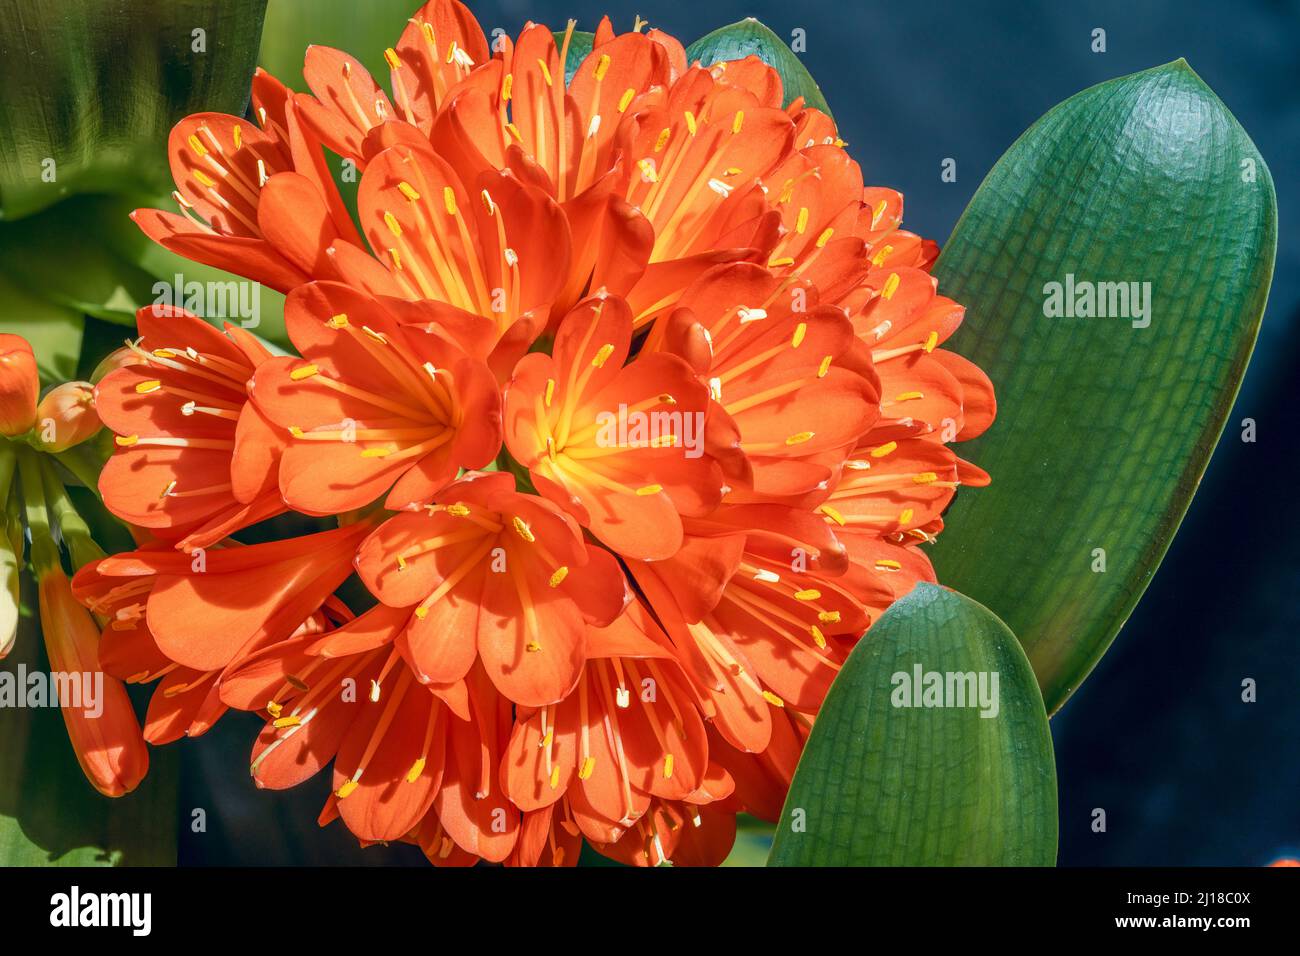 Beautiful Clivia Miniata bloom with bright orange petals and yellow stamens arranged in a cluster. Stock Photo